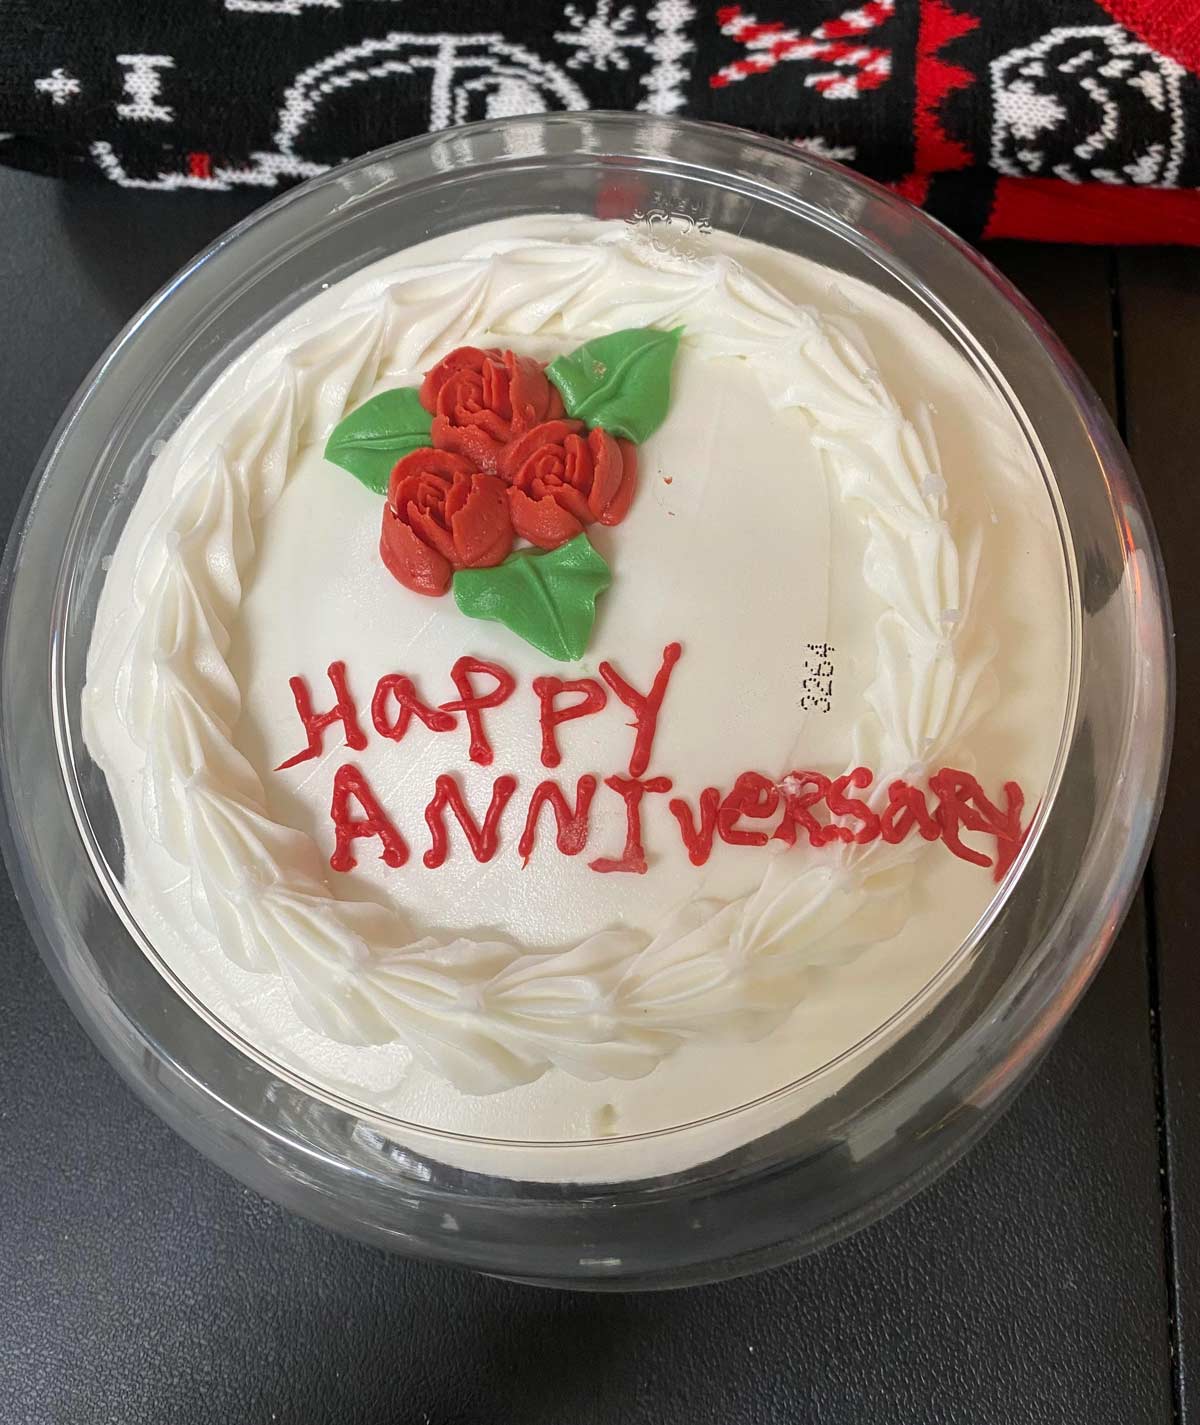 The cake my wife ordered from Walmart